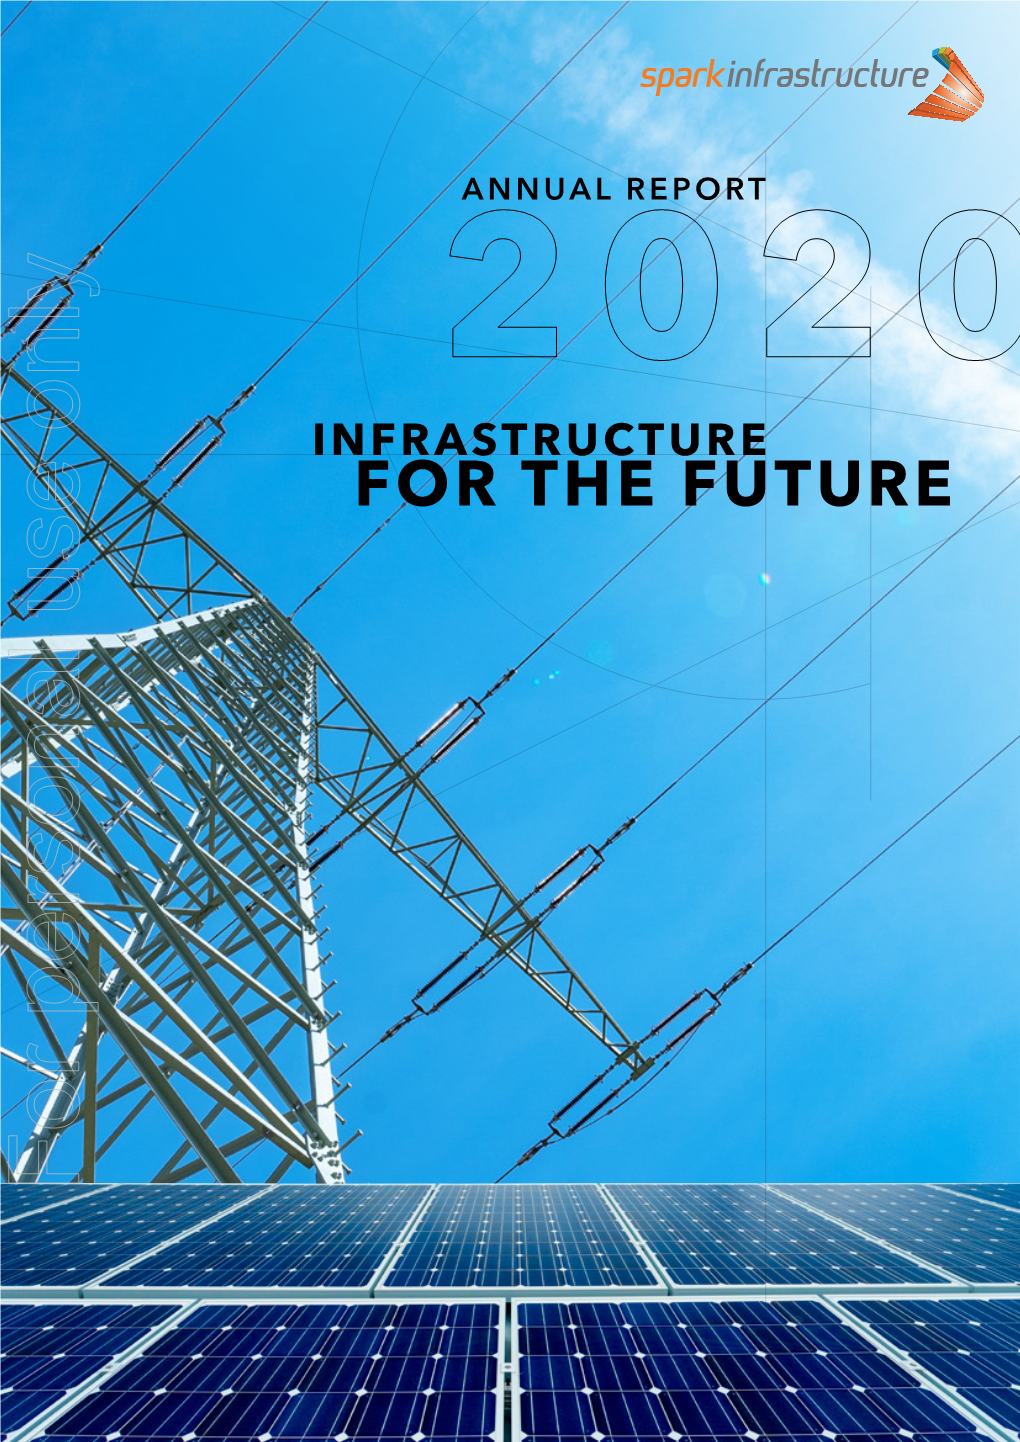 2021 2020 2020 Infrastructure Infrastructure for the Future for the Future